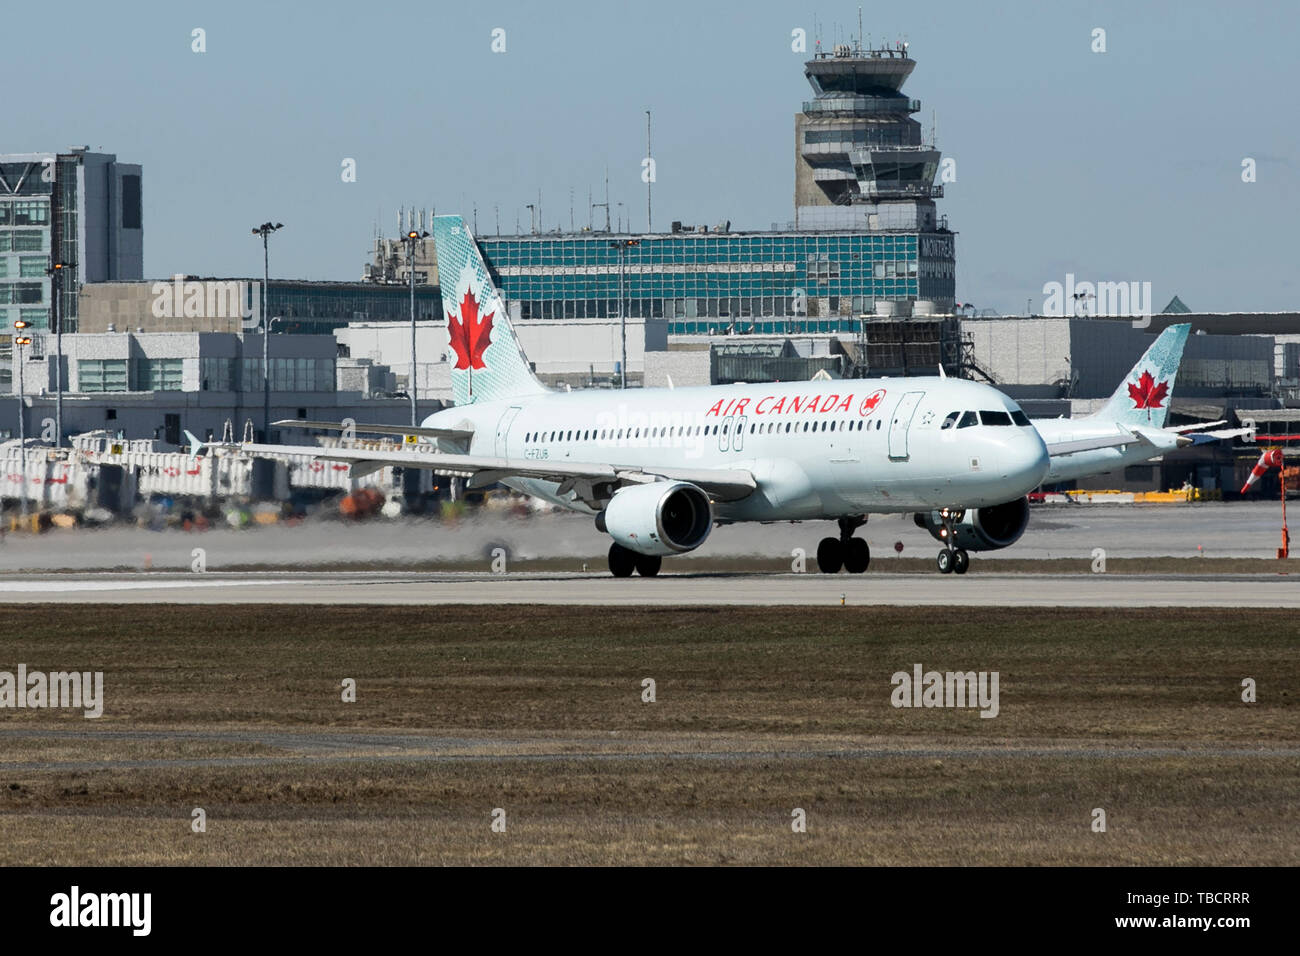 A Air Canada Airbus A320 airplane is seen departing Montréal-Pierre Elliott Trudeau International Airport in Montreal, Quebec, Canada, on April 22, 20 Stock Photo